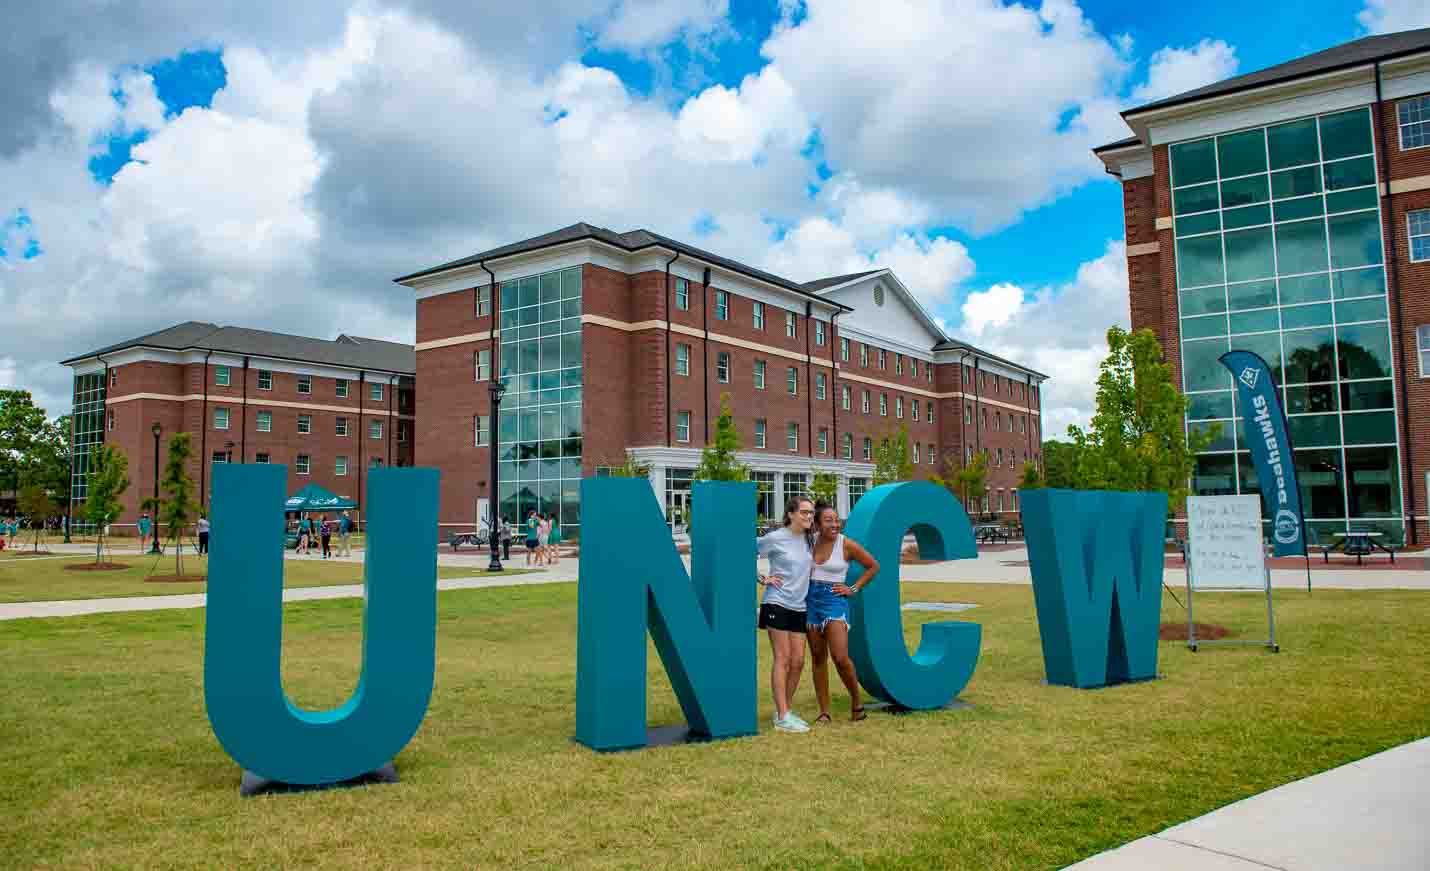 Students gathered at the Quad Fields in front of giant UNCW letters.